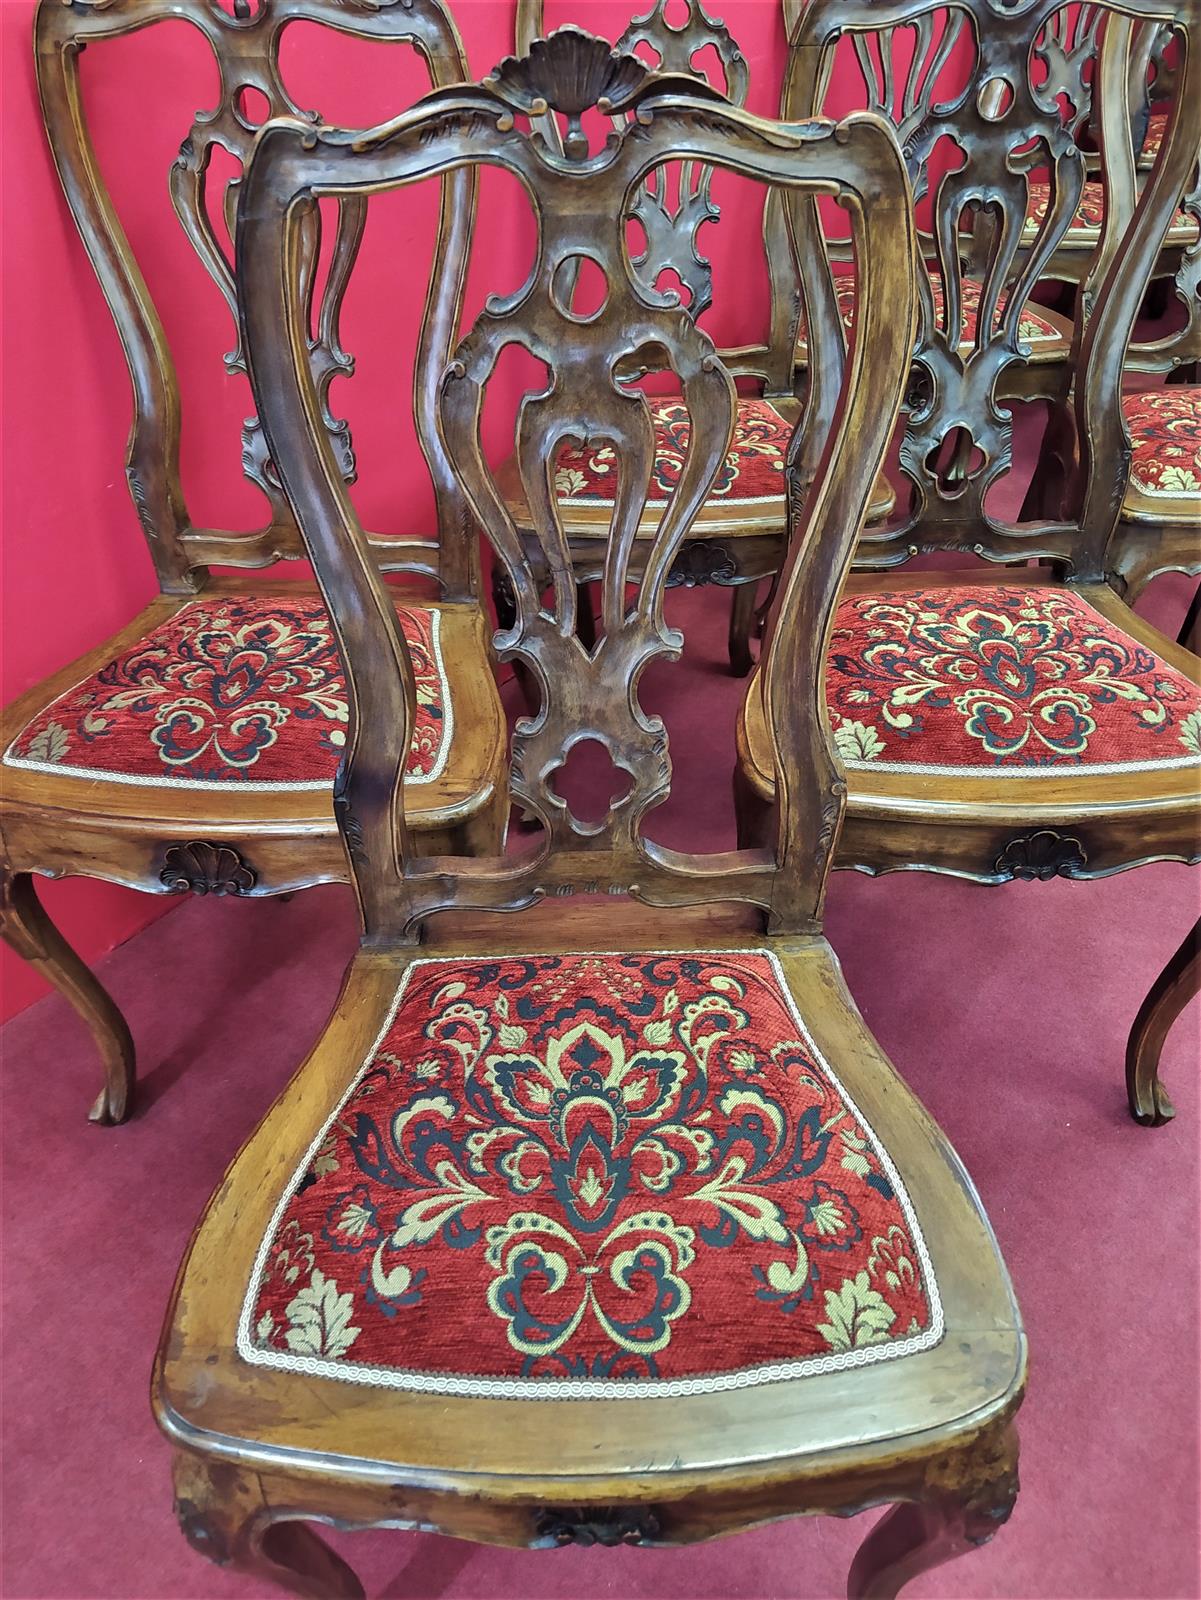 Group of 10 carved chairs